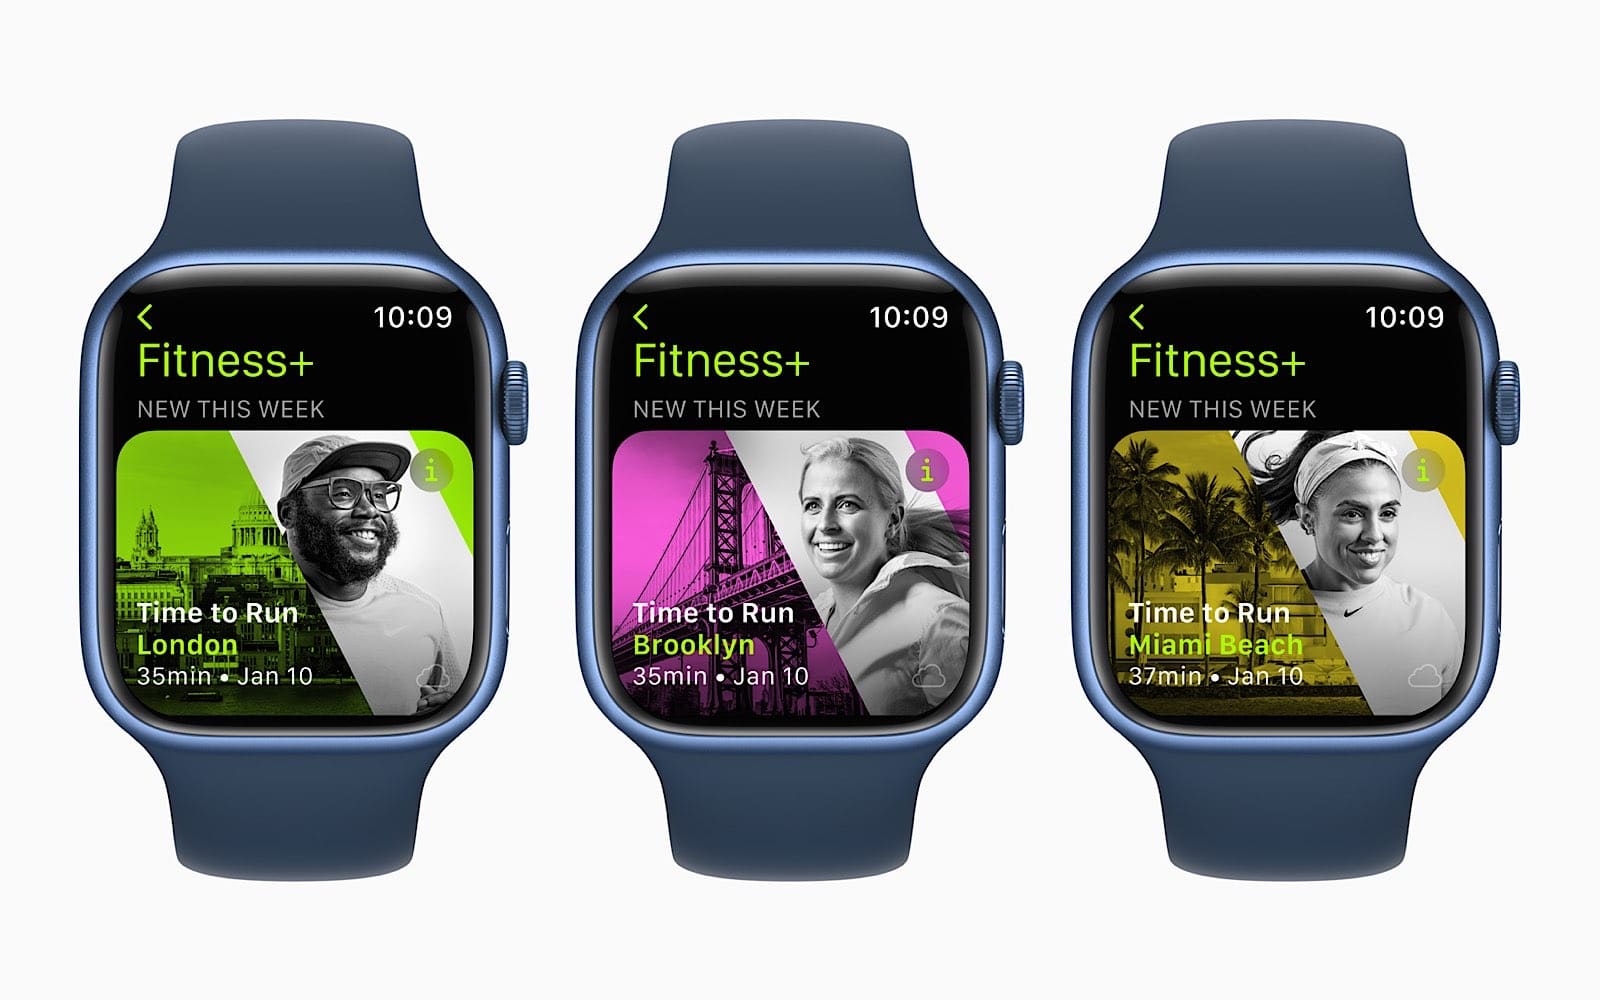 Apple Fitness+ "Time to Run"